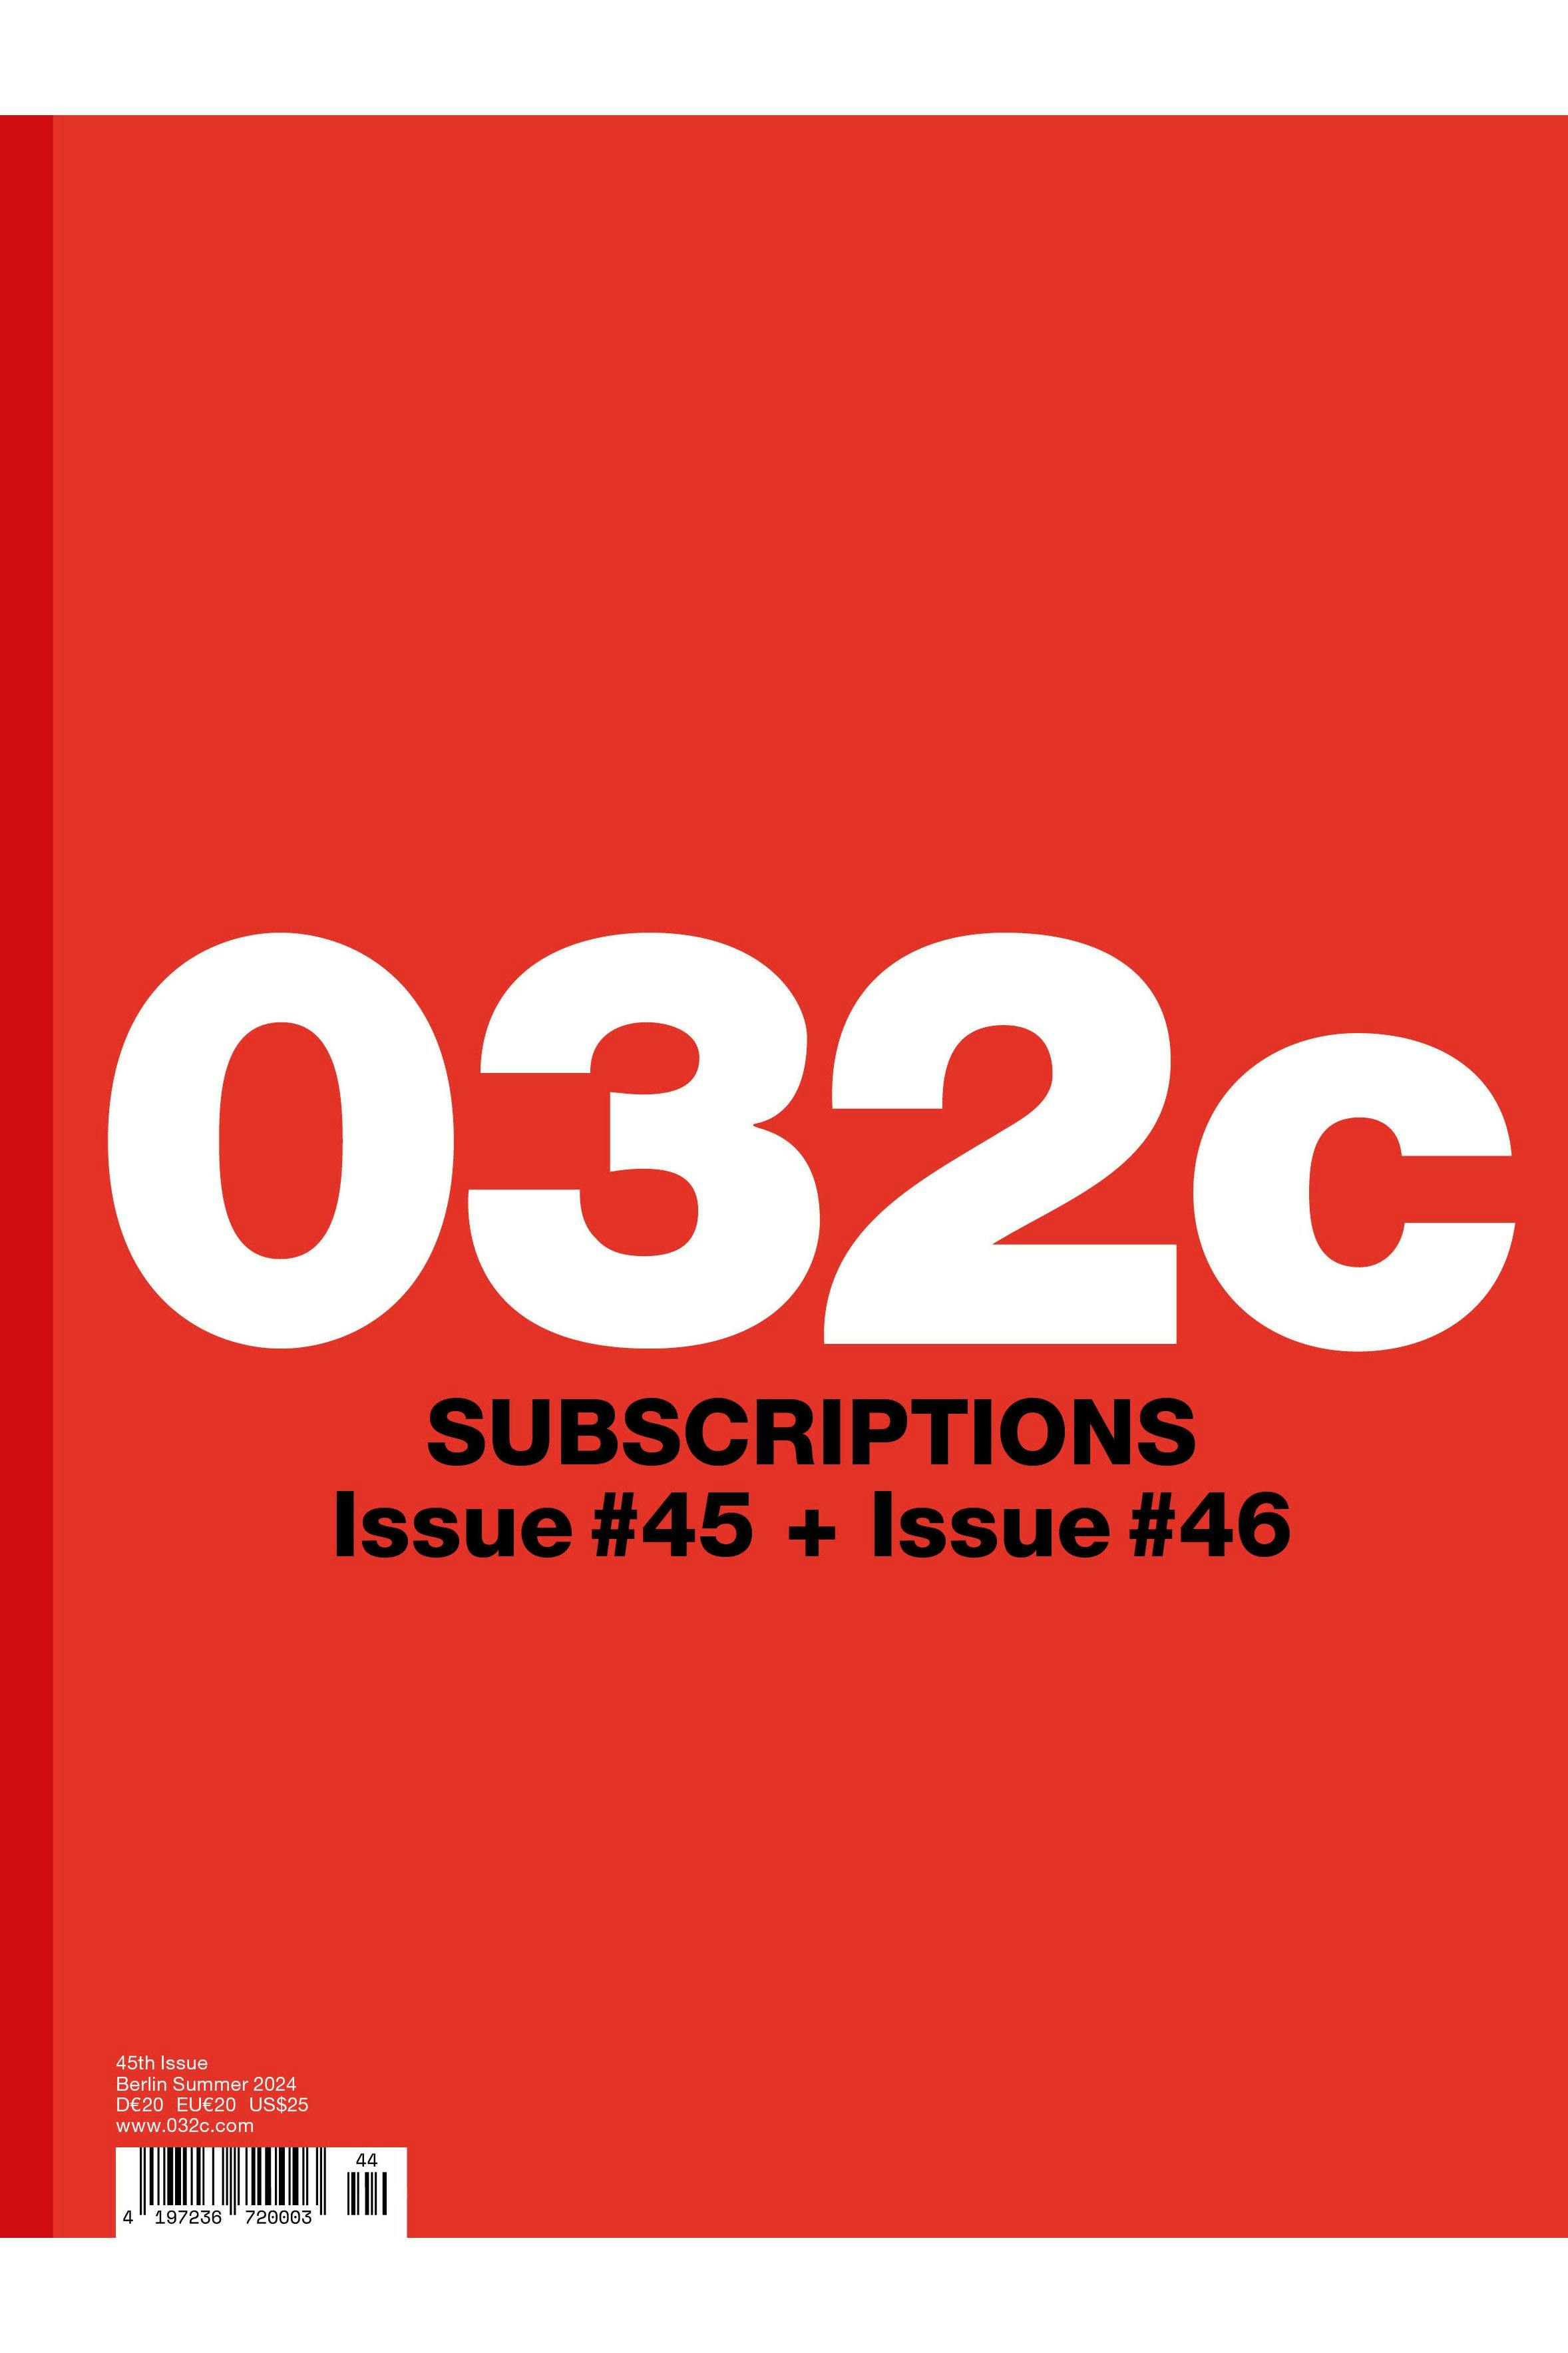 One Year Subscription (Issues 45 & 46) - 4-6